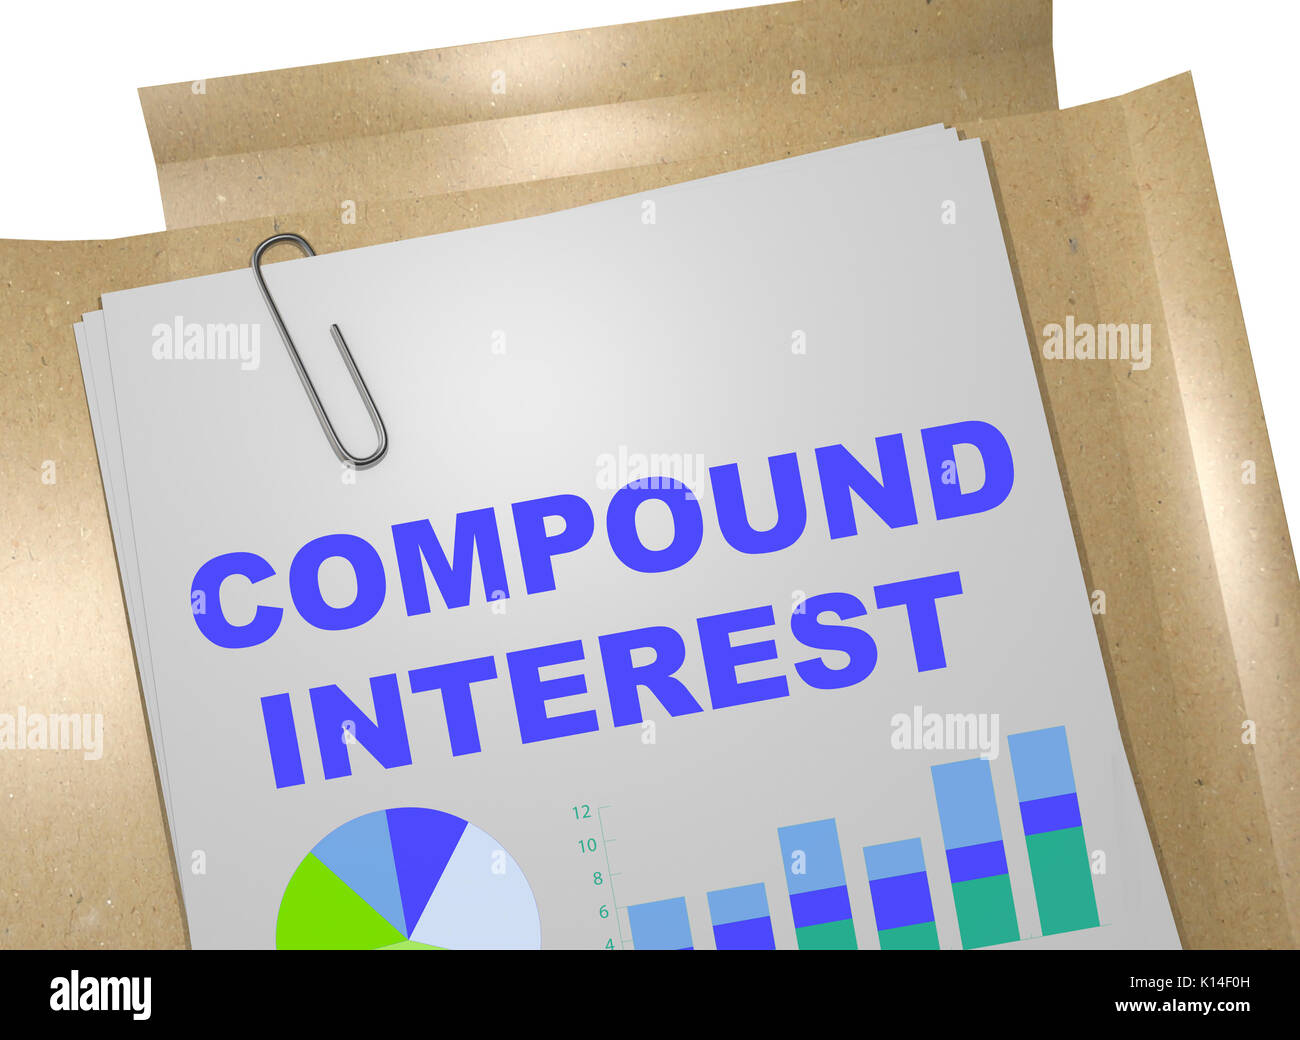 3D illustration of "COMPOUND INTEREST" title on business document Stock Photo